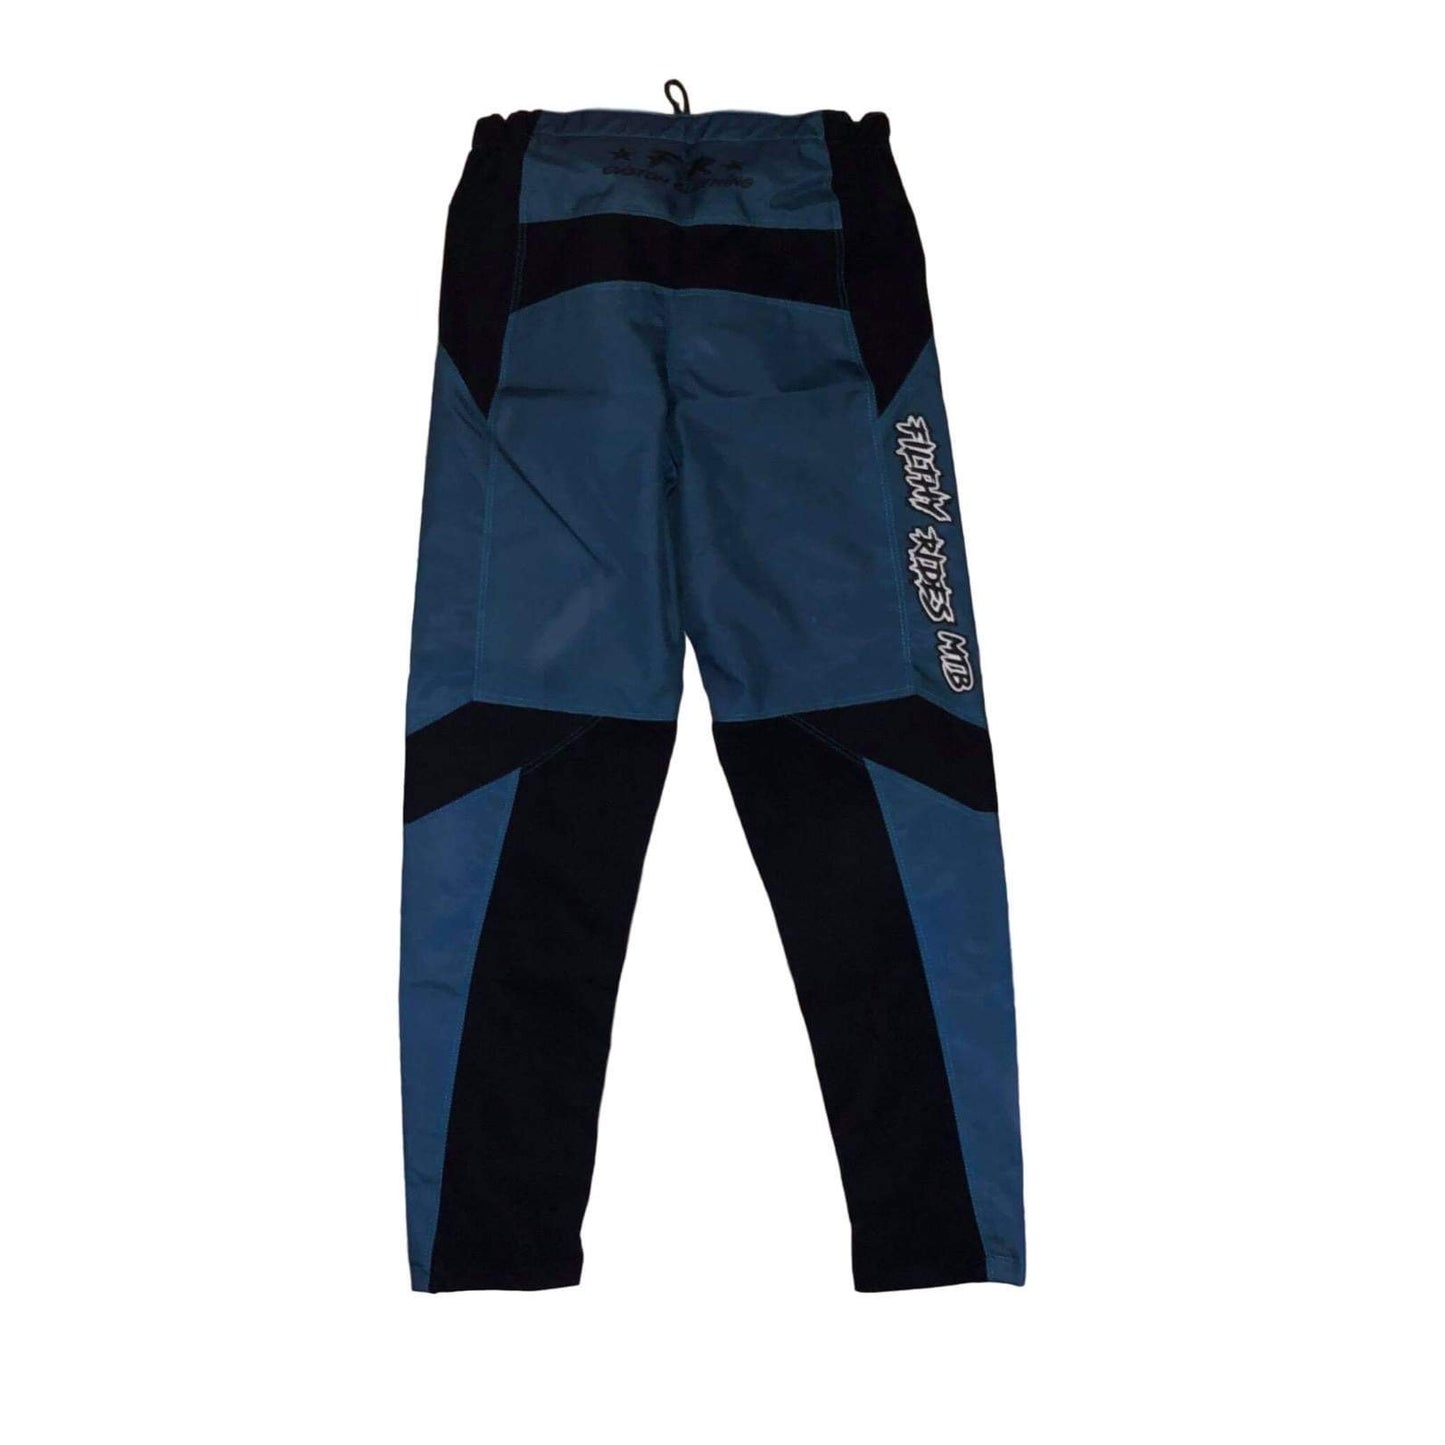 Blue Shorts & Trousers - (PRE-ORDER)